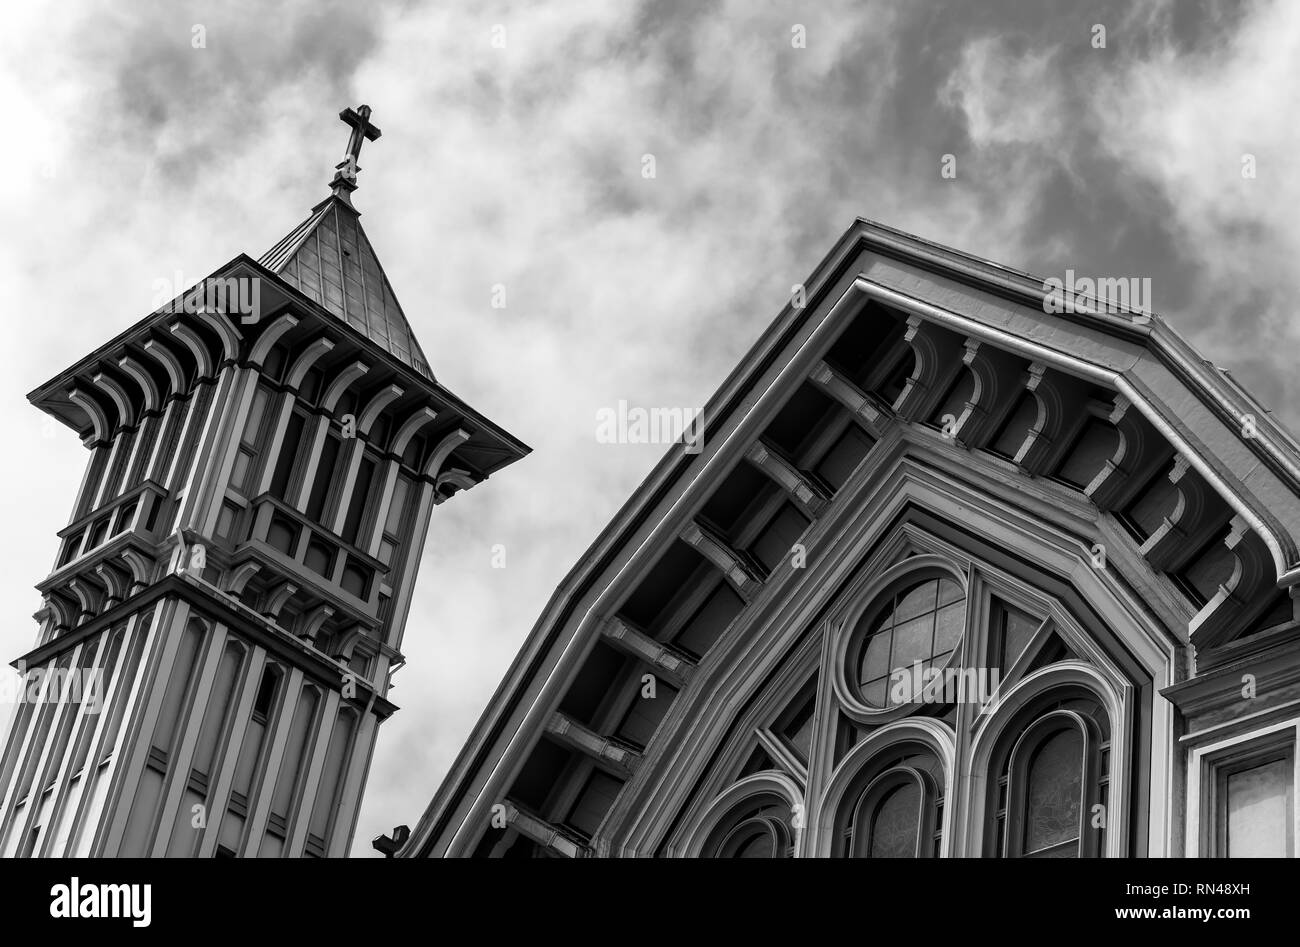 Architectural structure of the Chapel of St. Vincent De Paul, San Francisco, California, United States, in black and white. Stock Photo